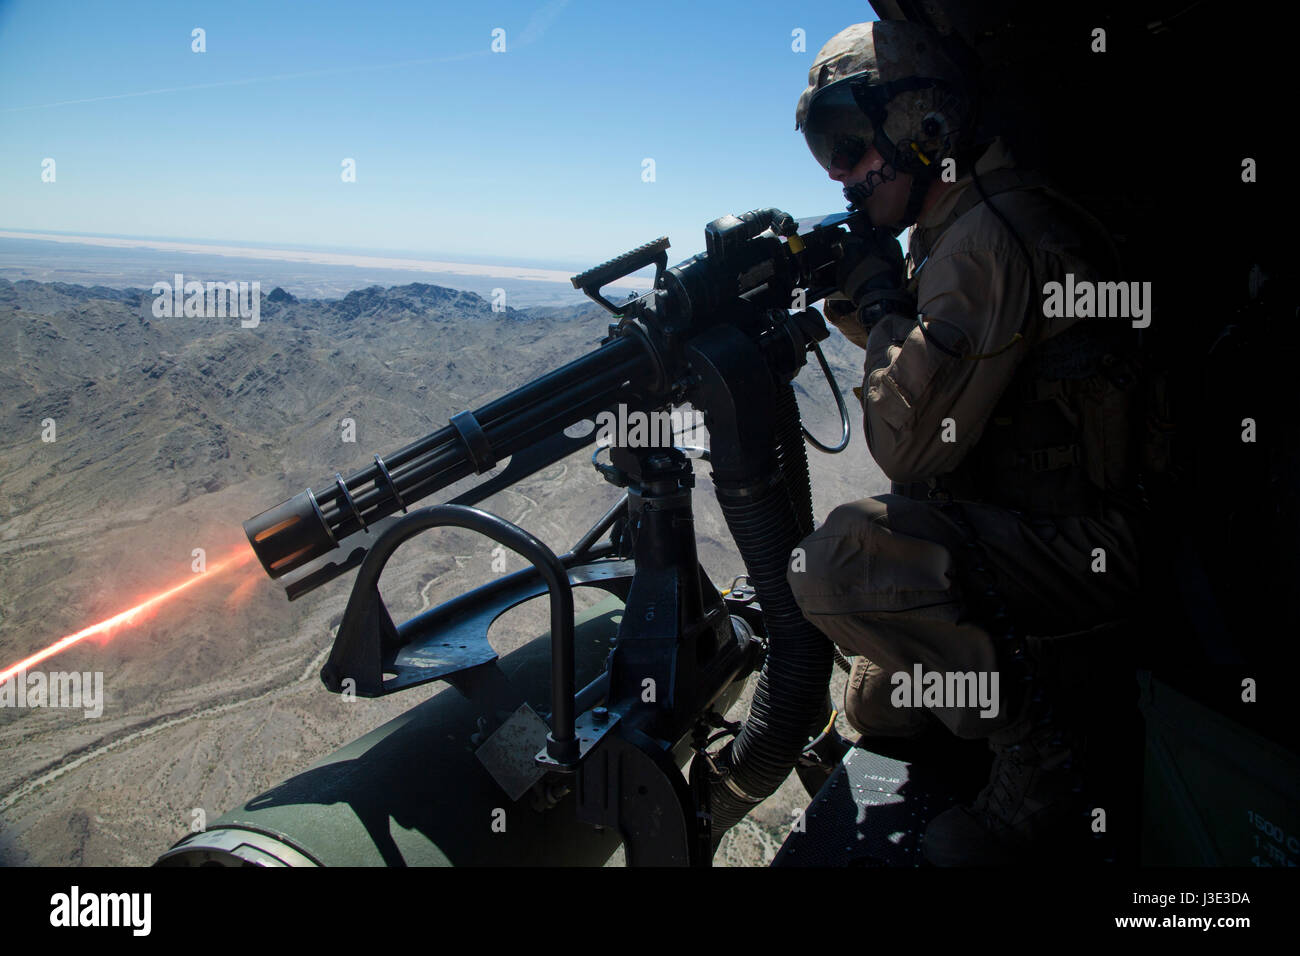 U.S. Marine soldiers operate a GAU-17 Vulcan Gatling machine gun cannon from a USMC UH-1Y Venom helicopter during an aerial gunnery drill at the Chocolate Mountain Aerial Gunnery Range April 5, 2017 in Niland, California.    (photo by Aaron James B. Vinculado /US Marines via Planetpix) Stock Photo